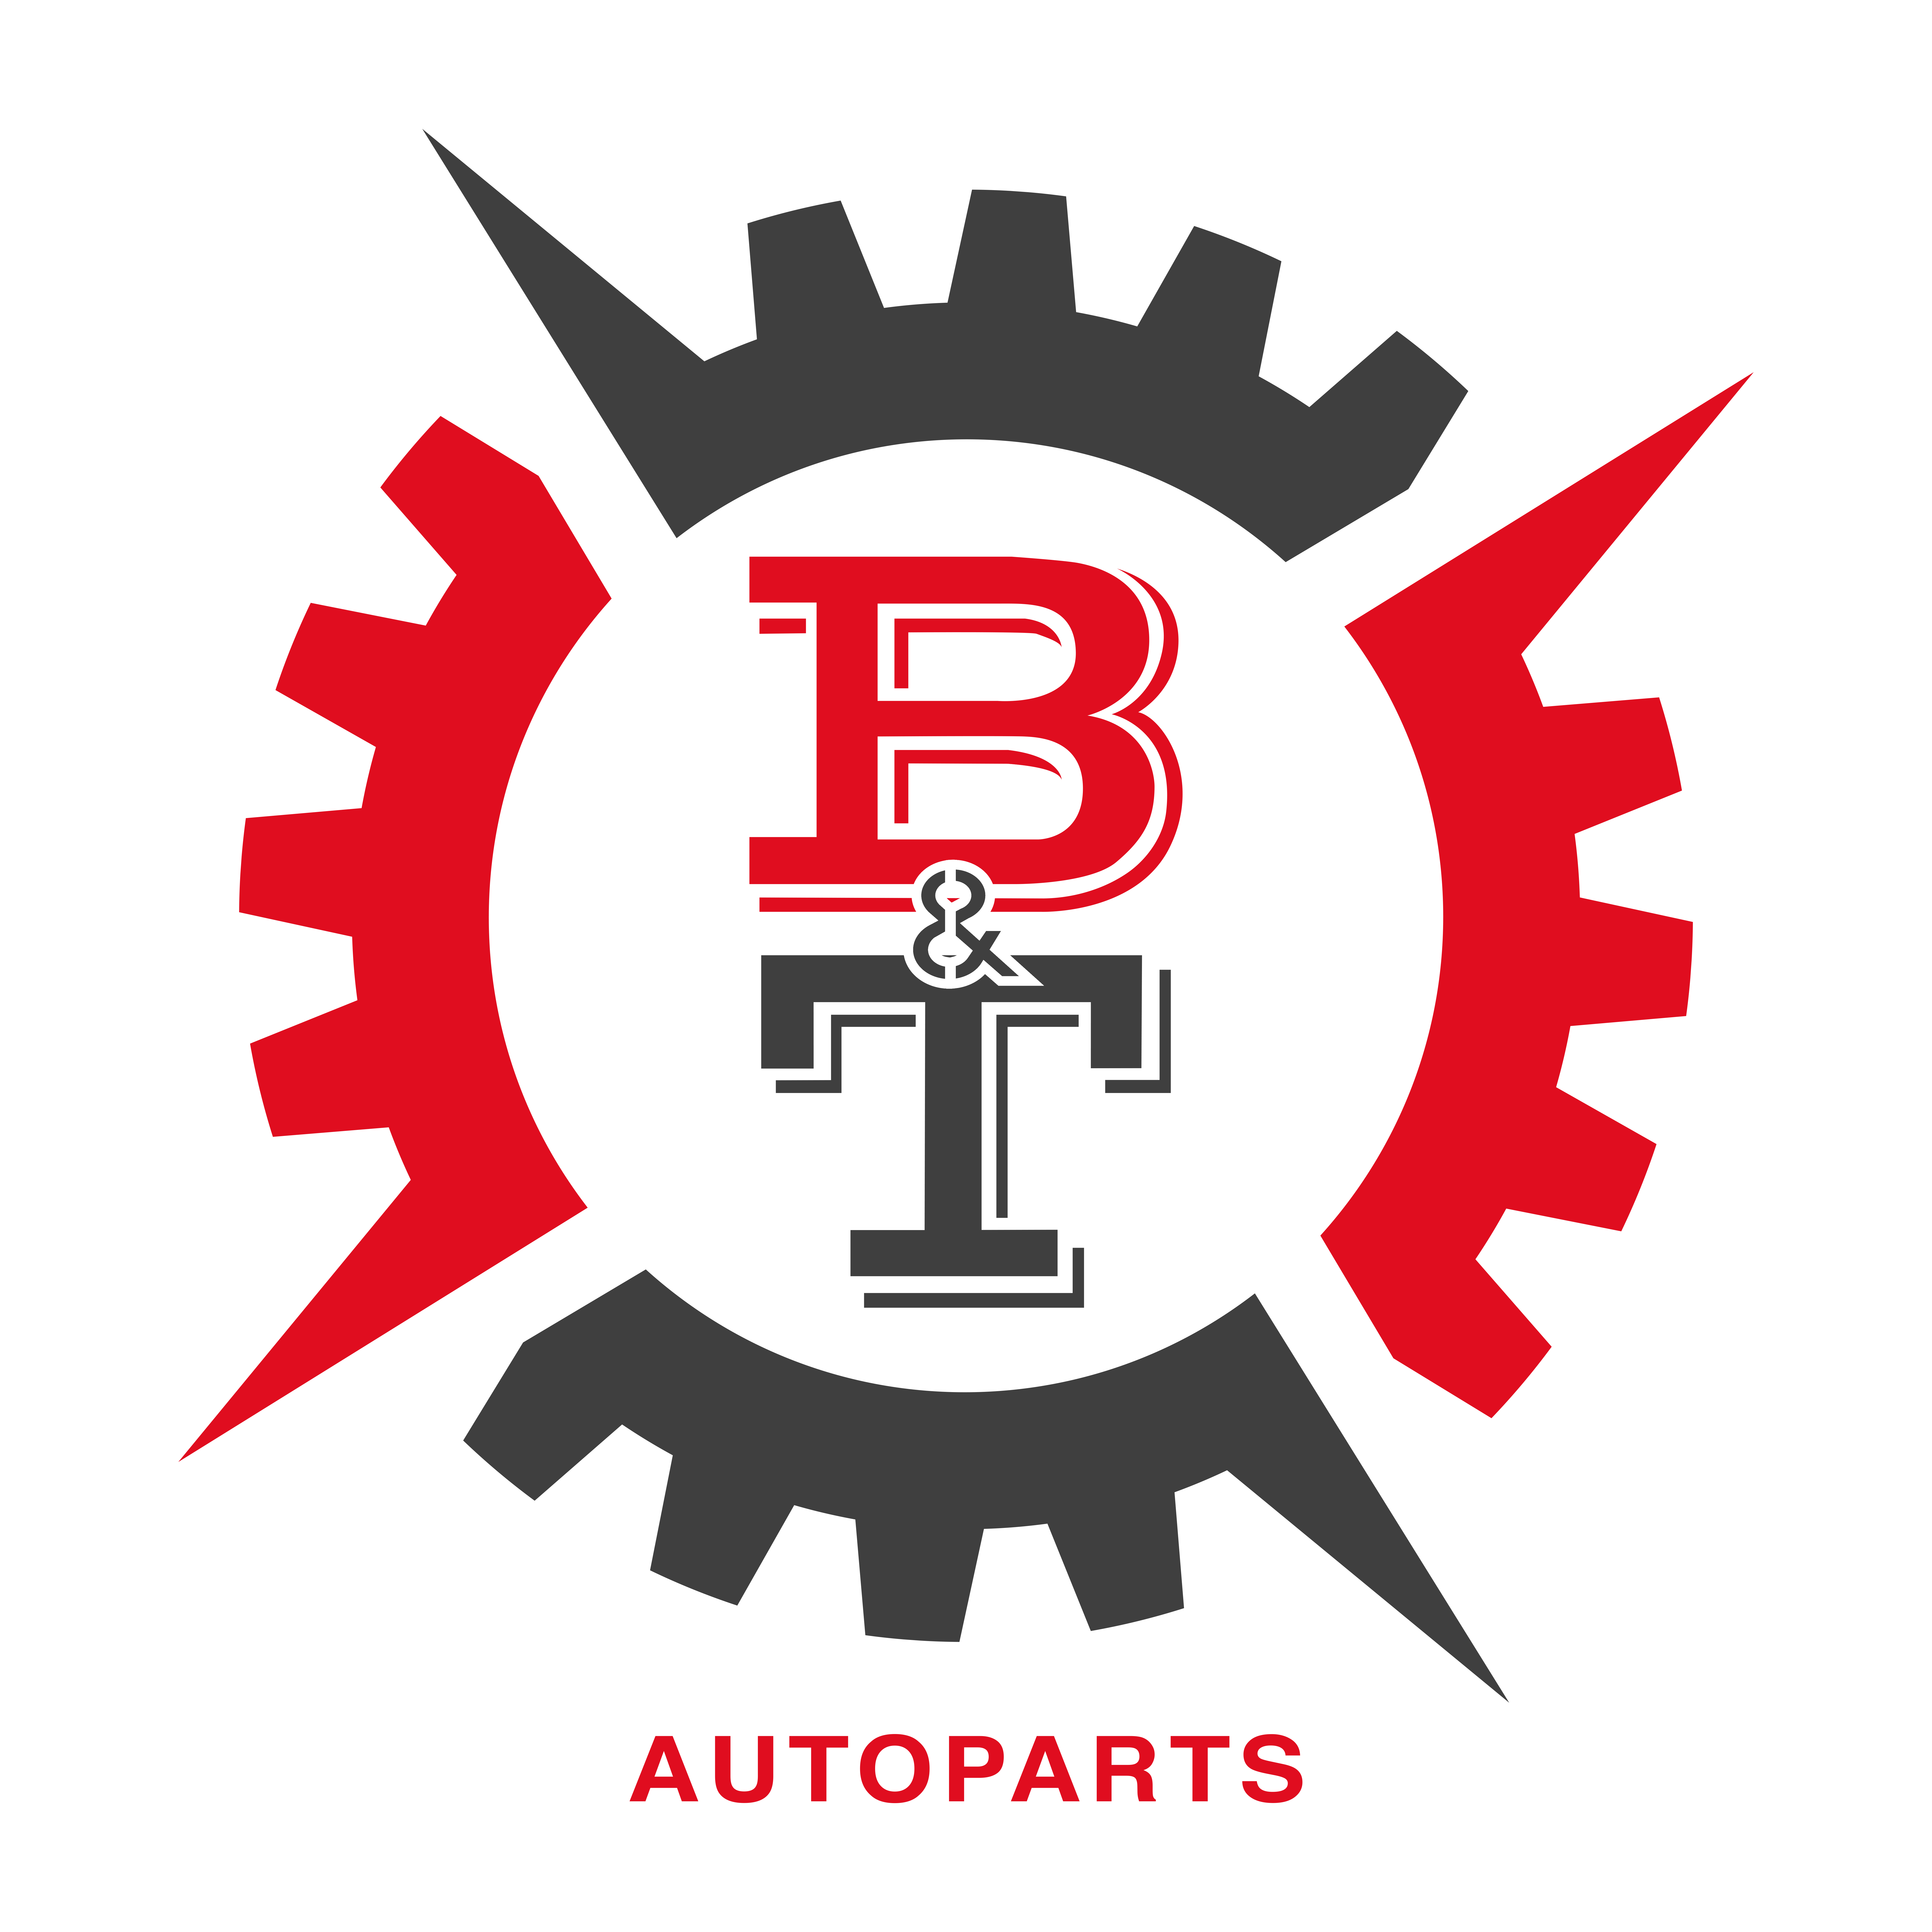 B-Parts  Used and Original (OEM) Auto Parts with Warranty